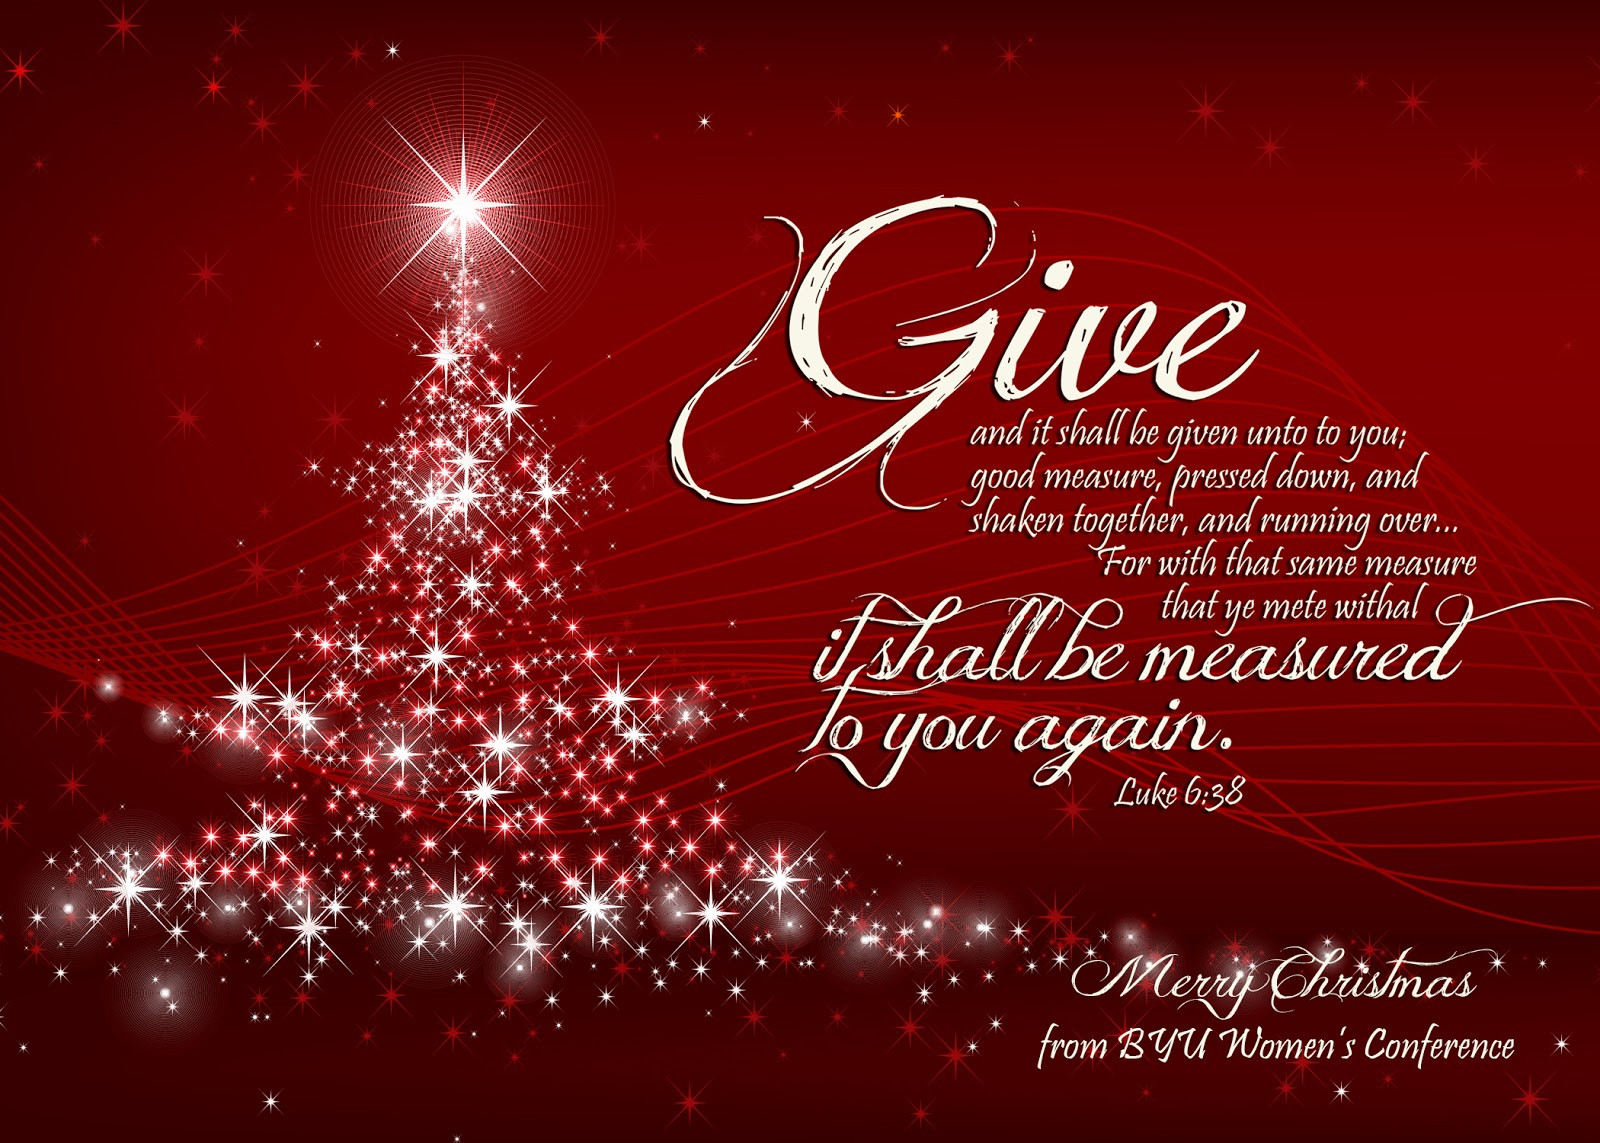 Christmas Card Message Ideas
 BYU Women s Conference Service Ideas The Gifts of Christmas